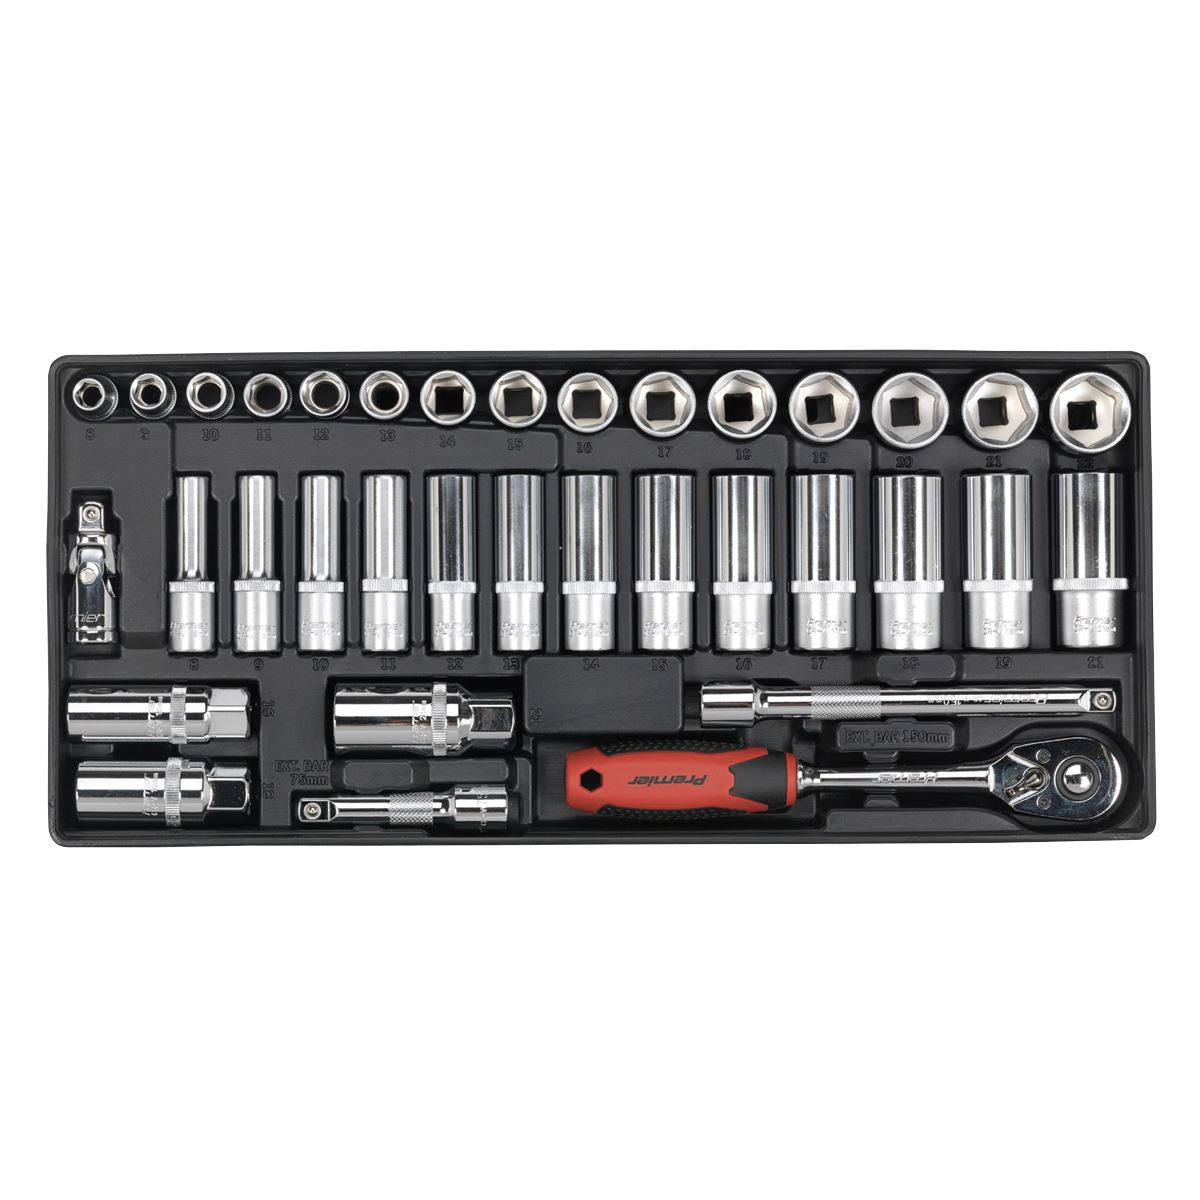 Sealey Premier Tool Tray with Socket Set 35pc 3/8"Sq Drive